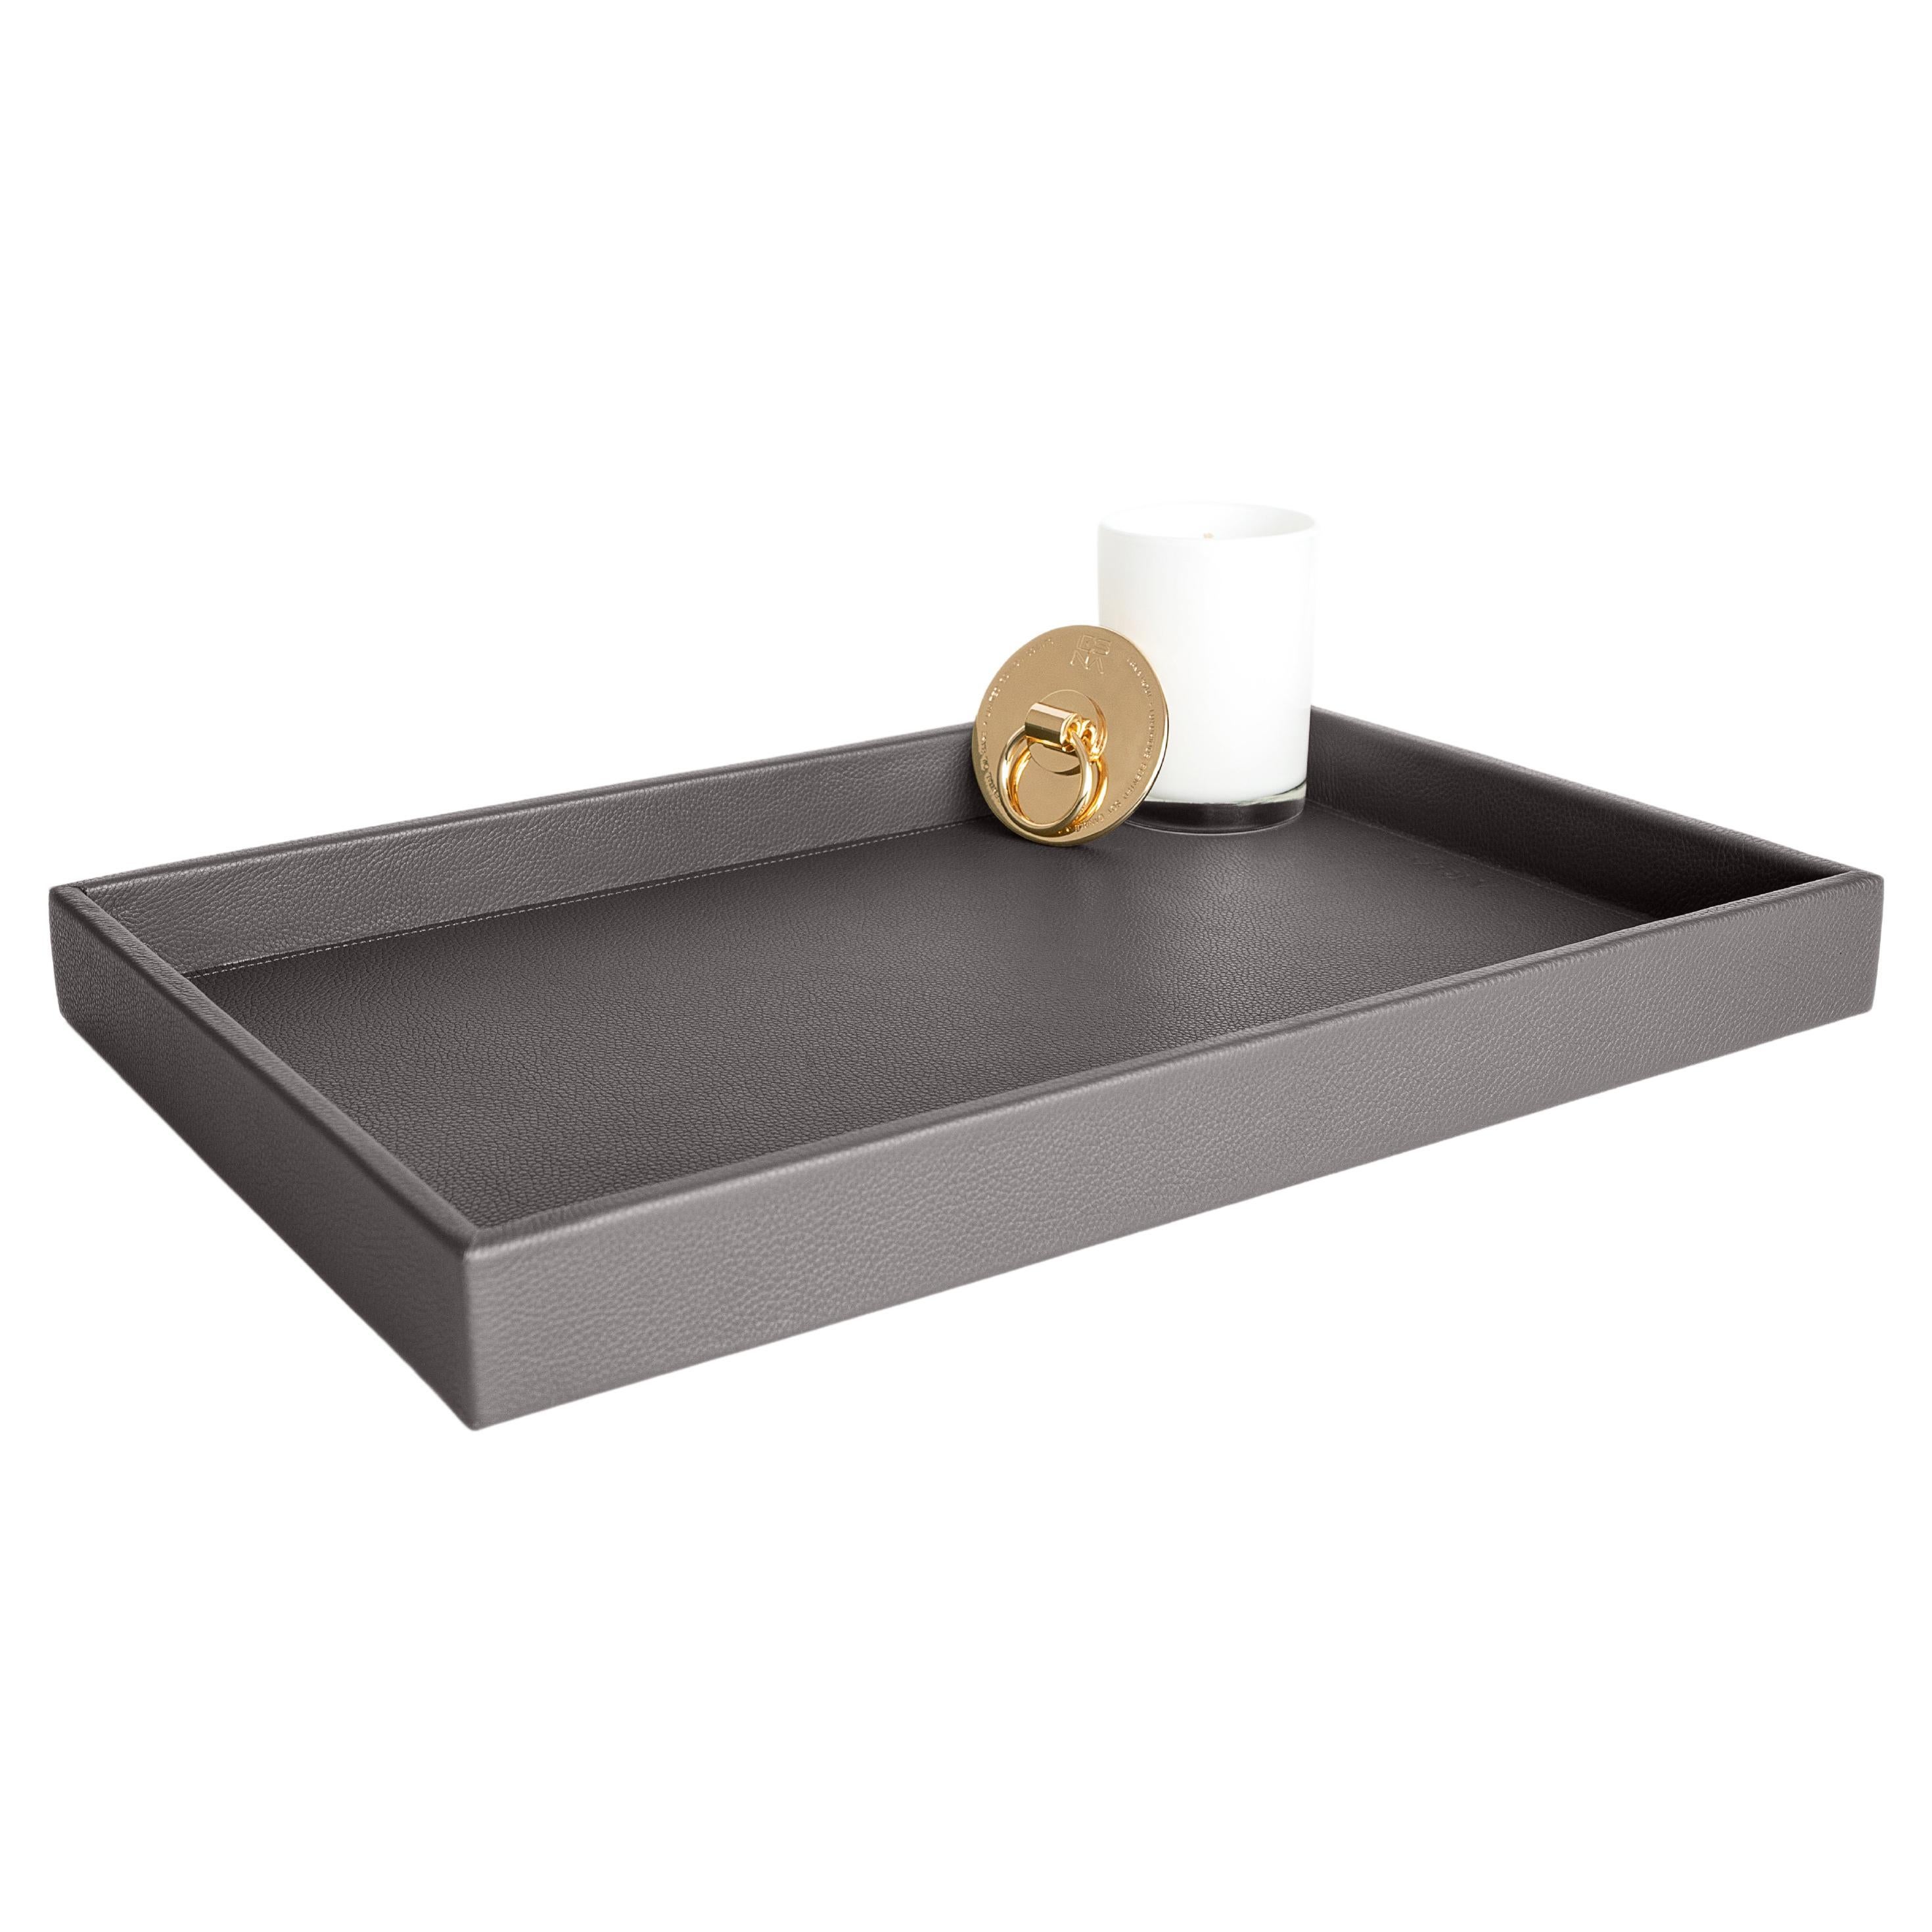 Leather Tray, Large A Rectangular Tray, Handmade in Brazil - Color: Zinc